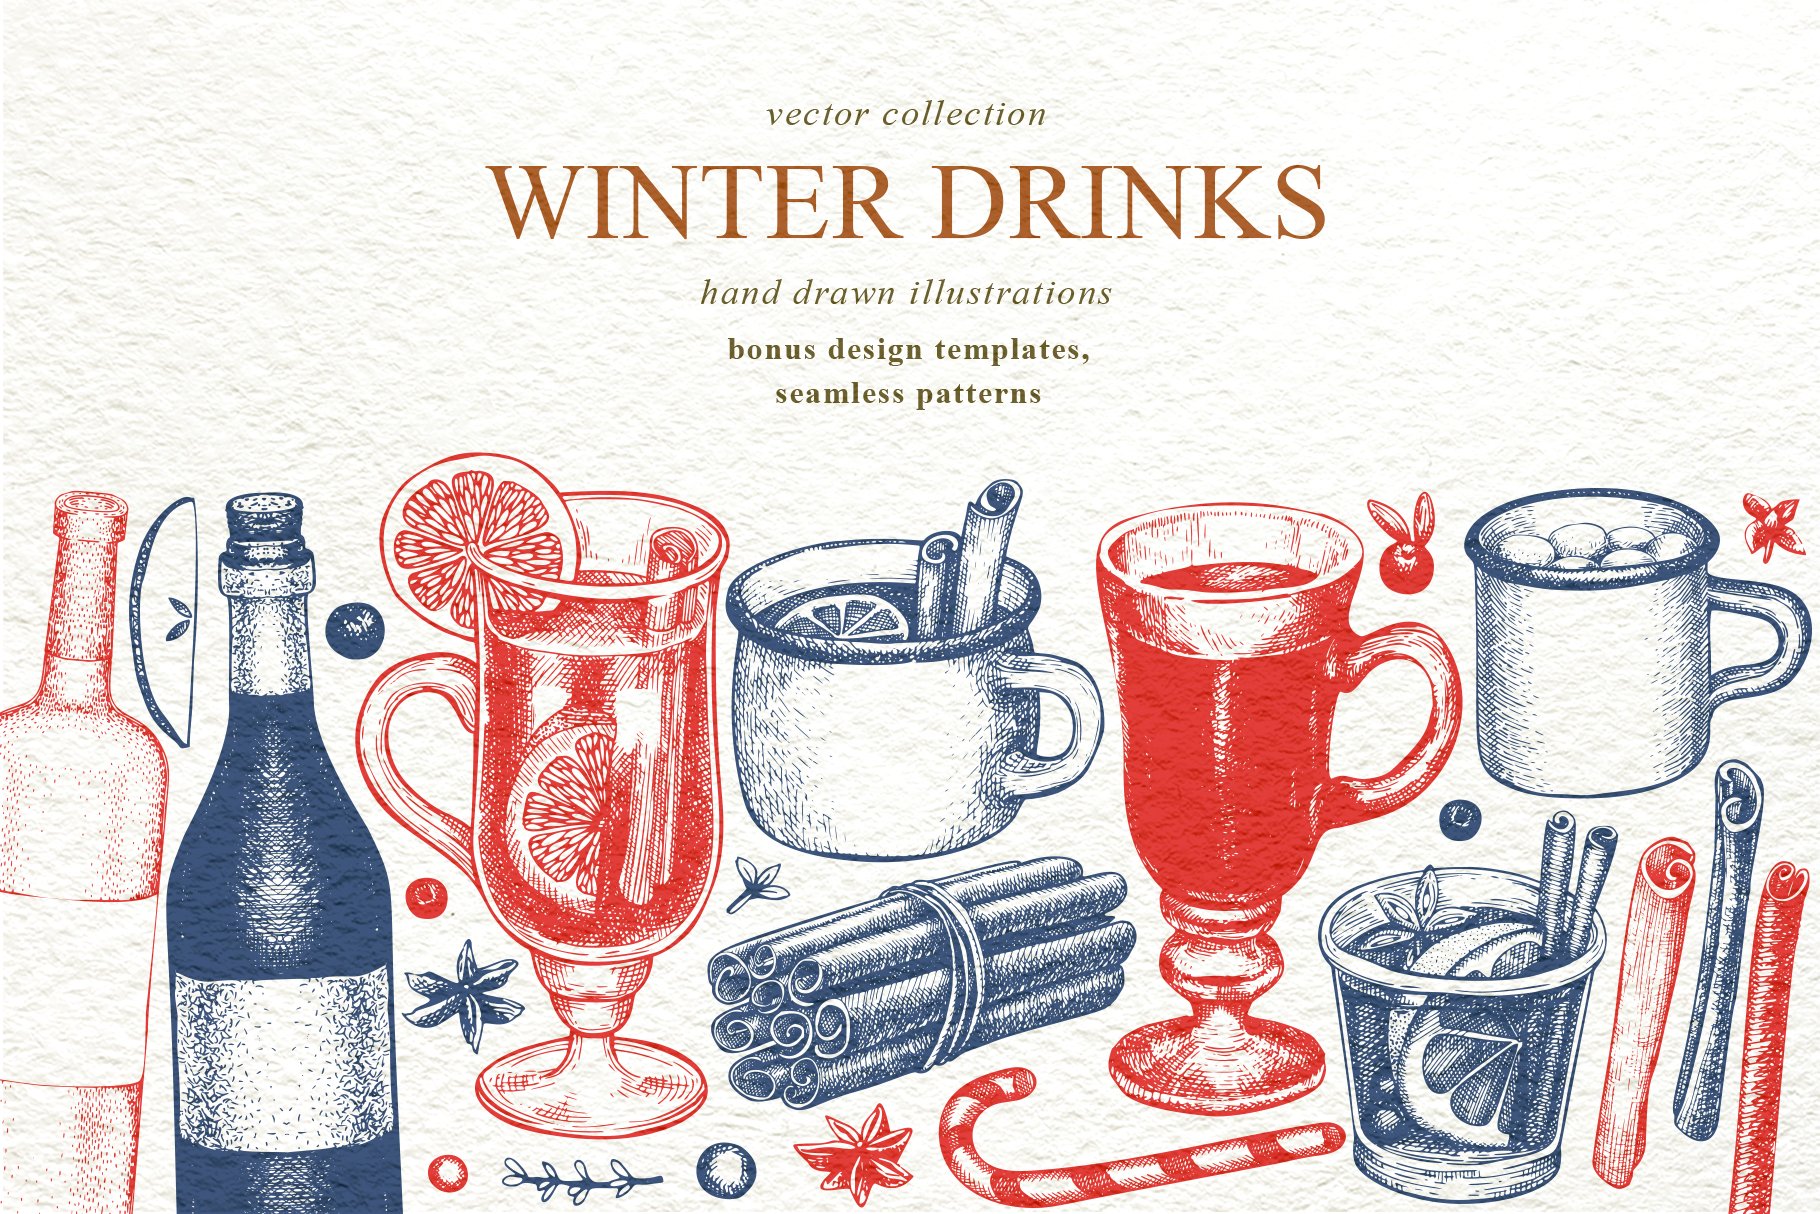 Winter Drinks Vector Collection cover image.